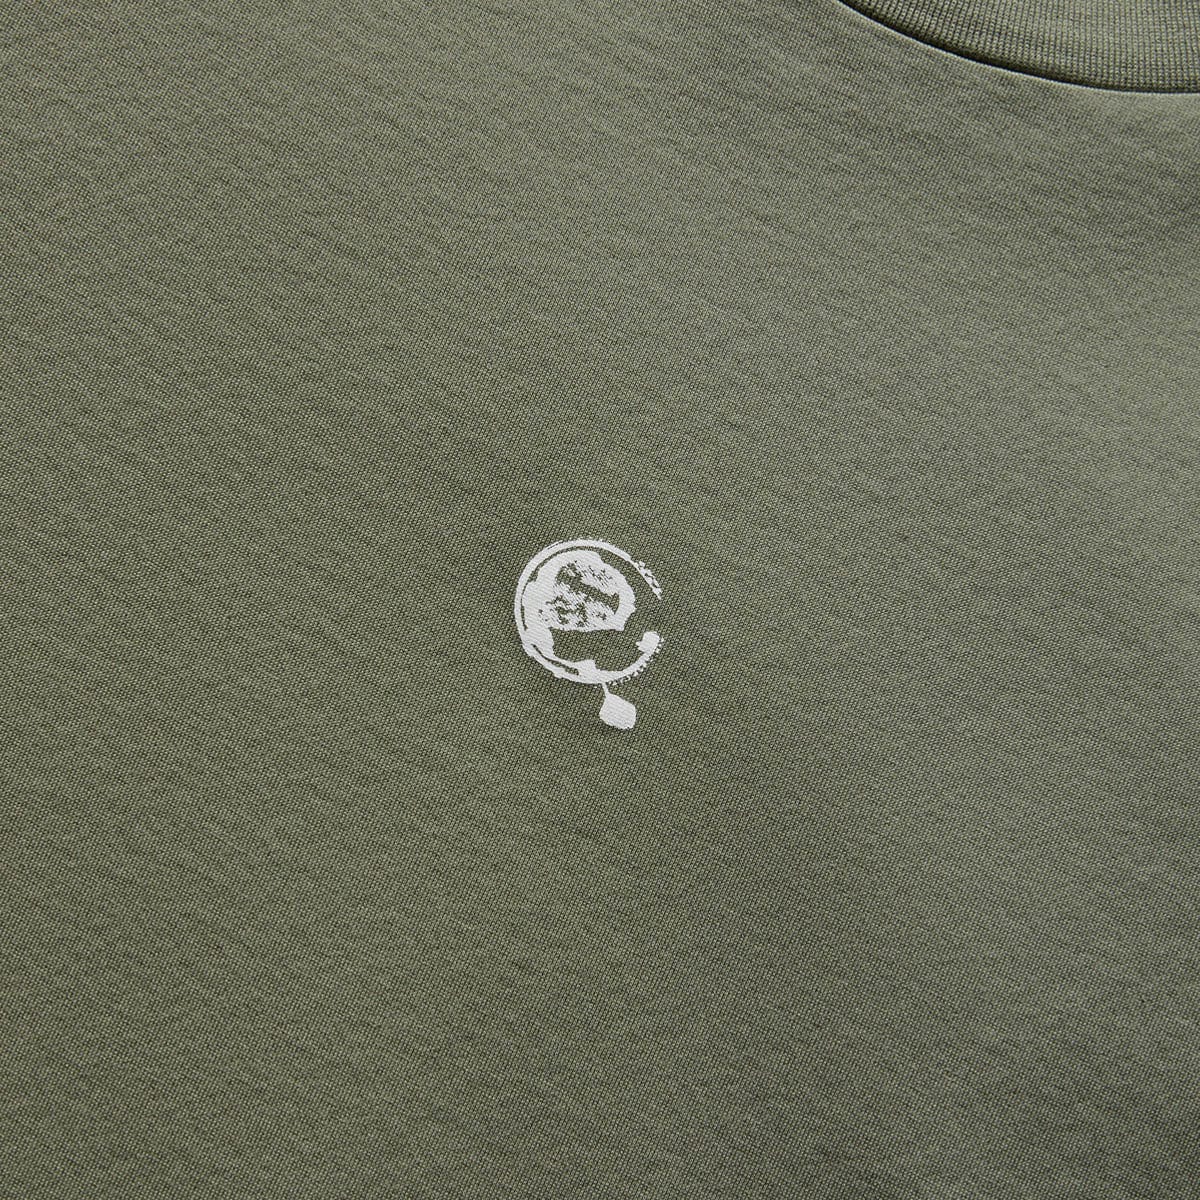 Stone Island Shadow Project T-Shirts GRAPHIC T-SHIRT 78192011A